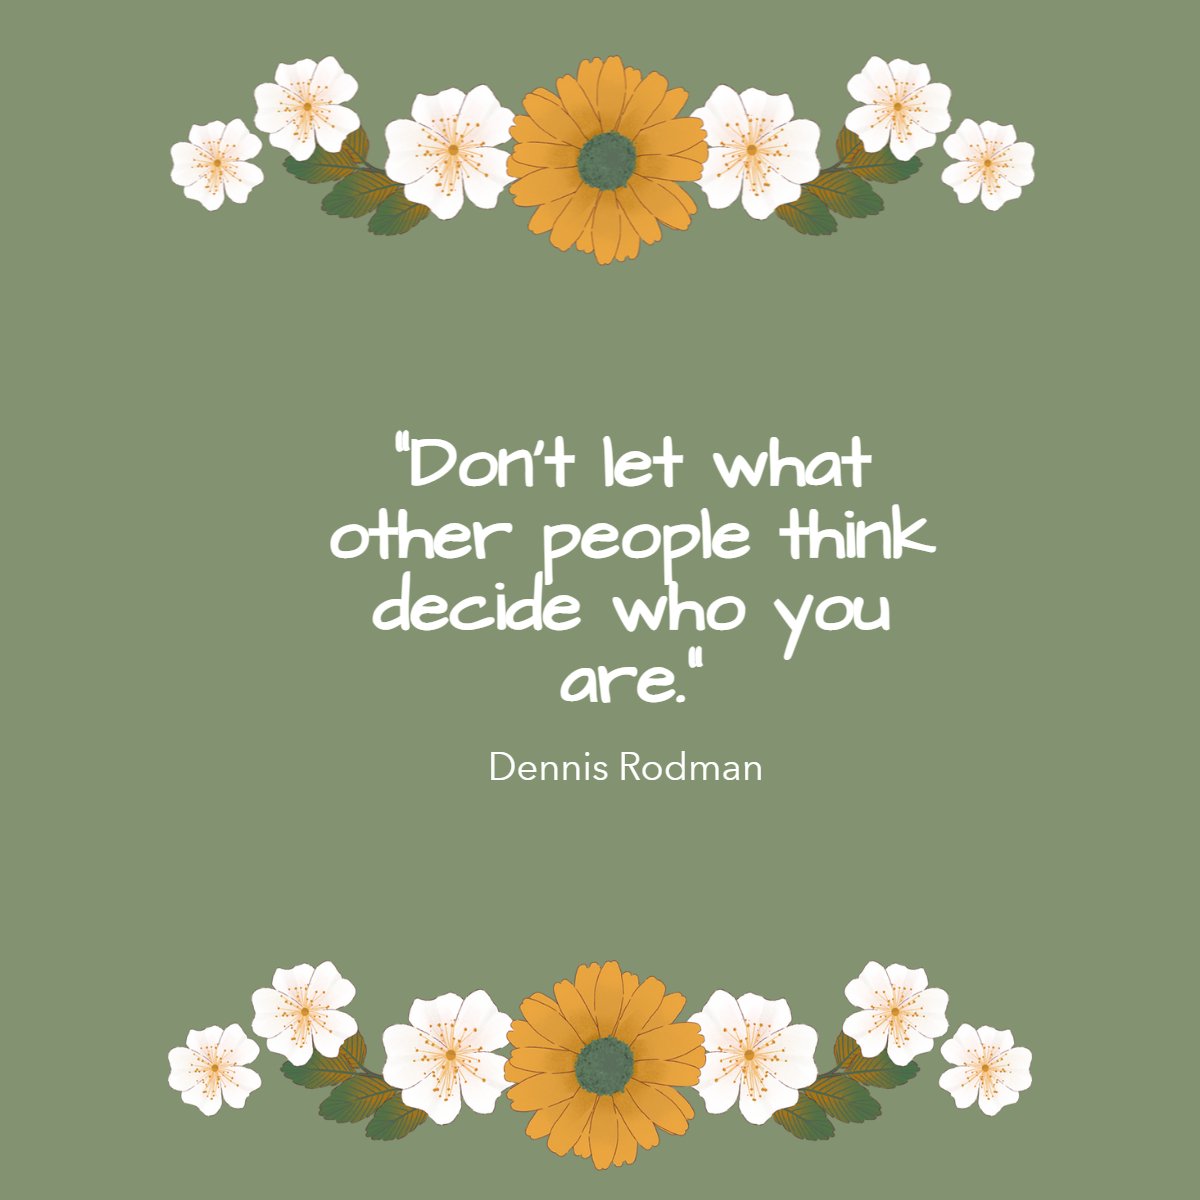 “Don't let what other people think decide who you are.”
— Dennis Rodman

#Motivation #DennisRodman #quoteoftheday✏️ #quotestagram